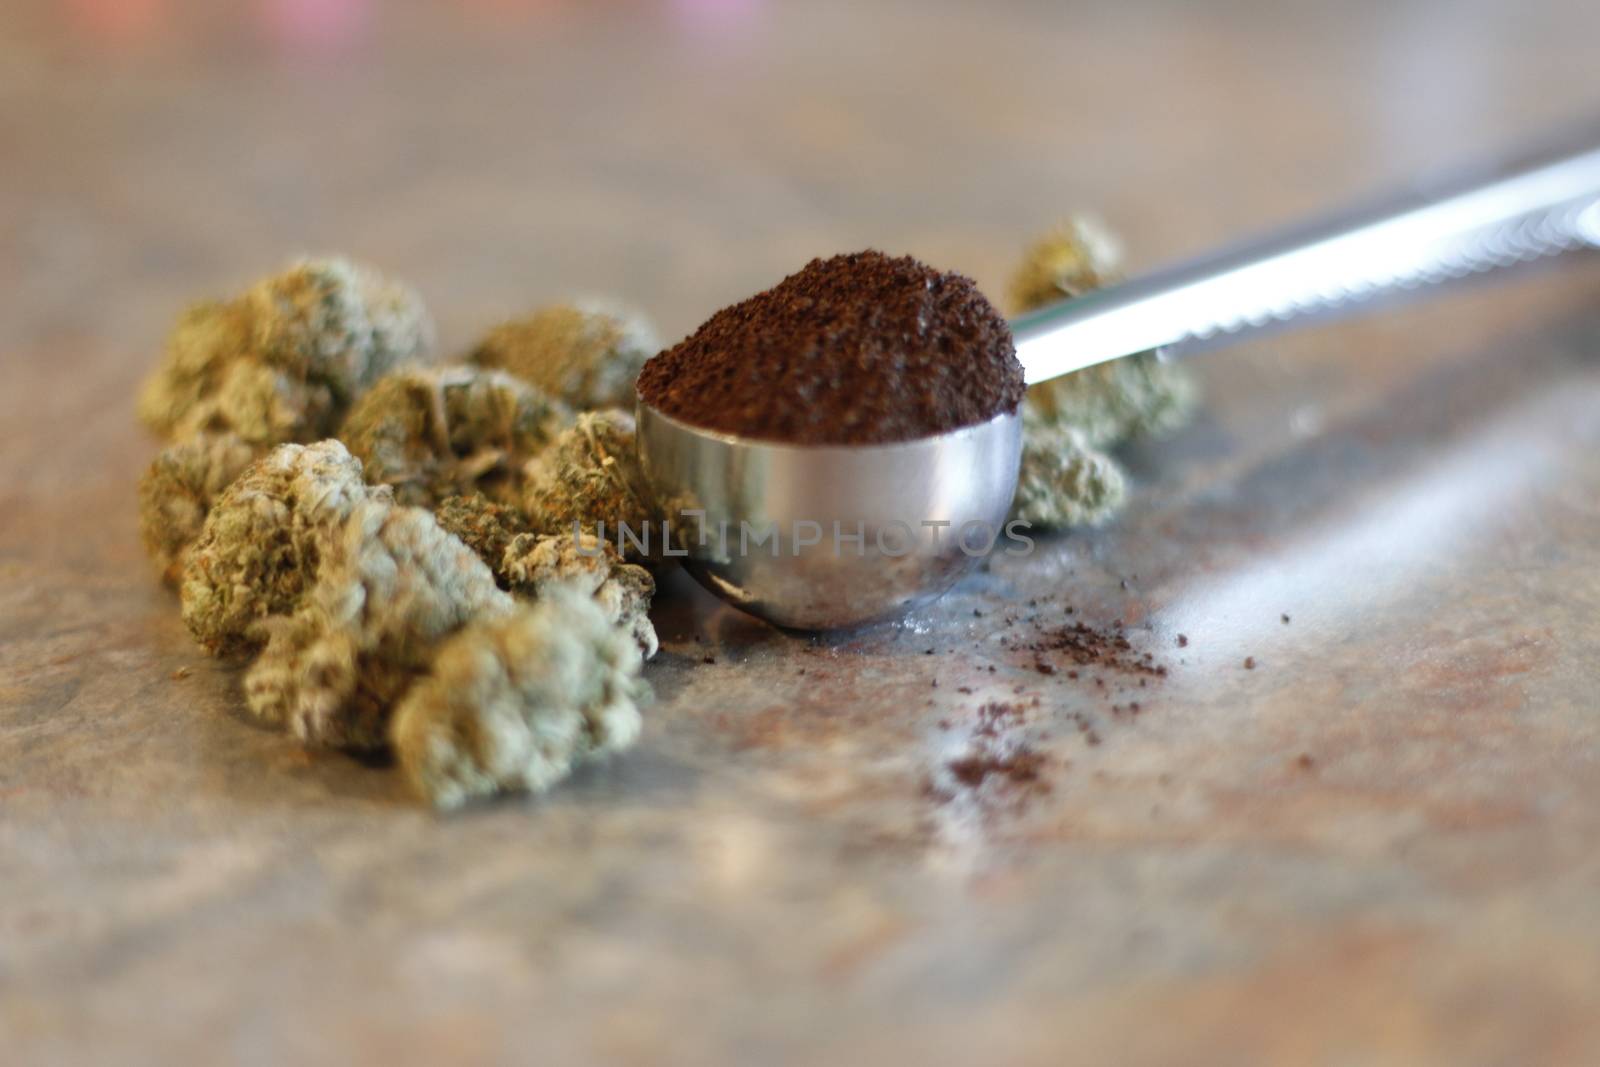 A scoop of coffee next to marijuana buds. Concept of cannabis infused products. by mynewturtle1